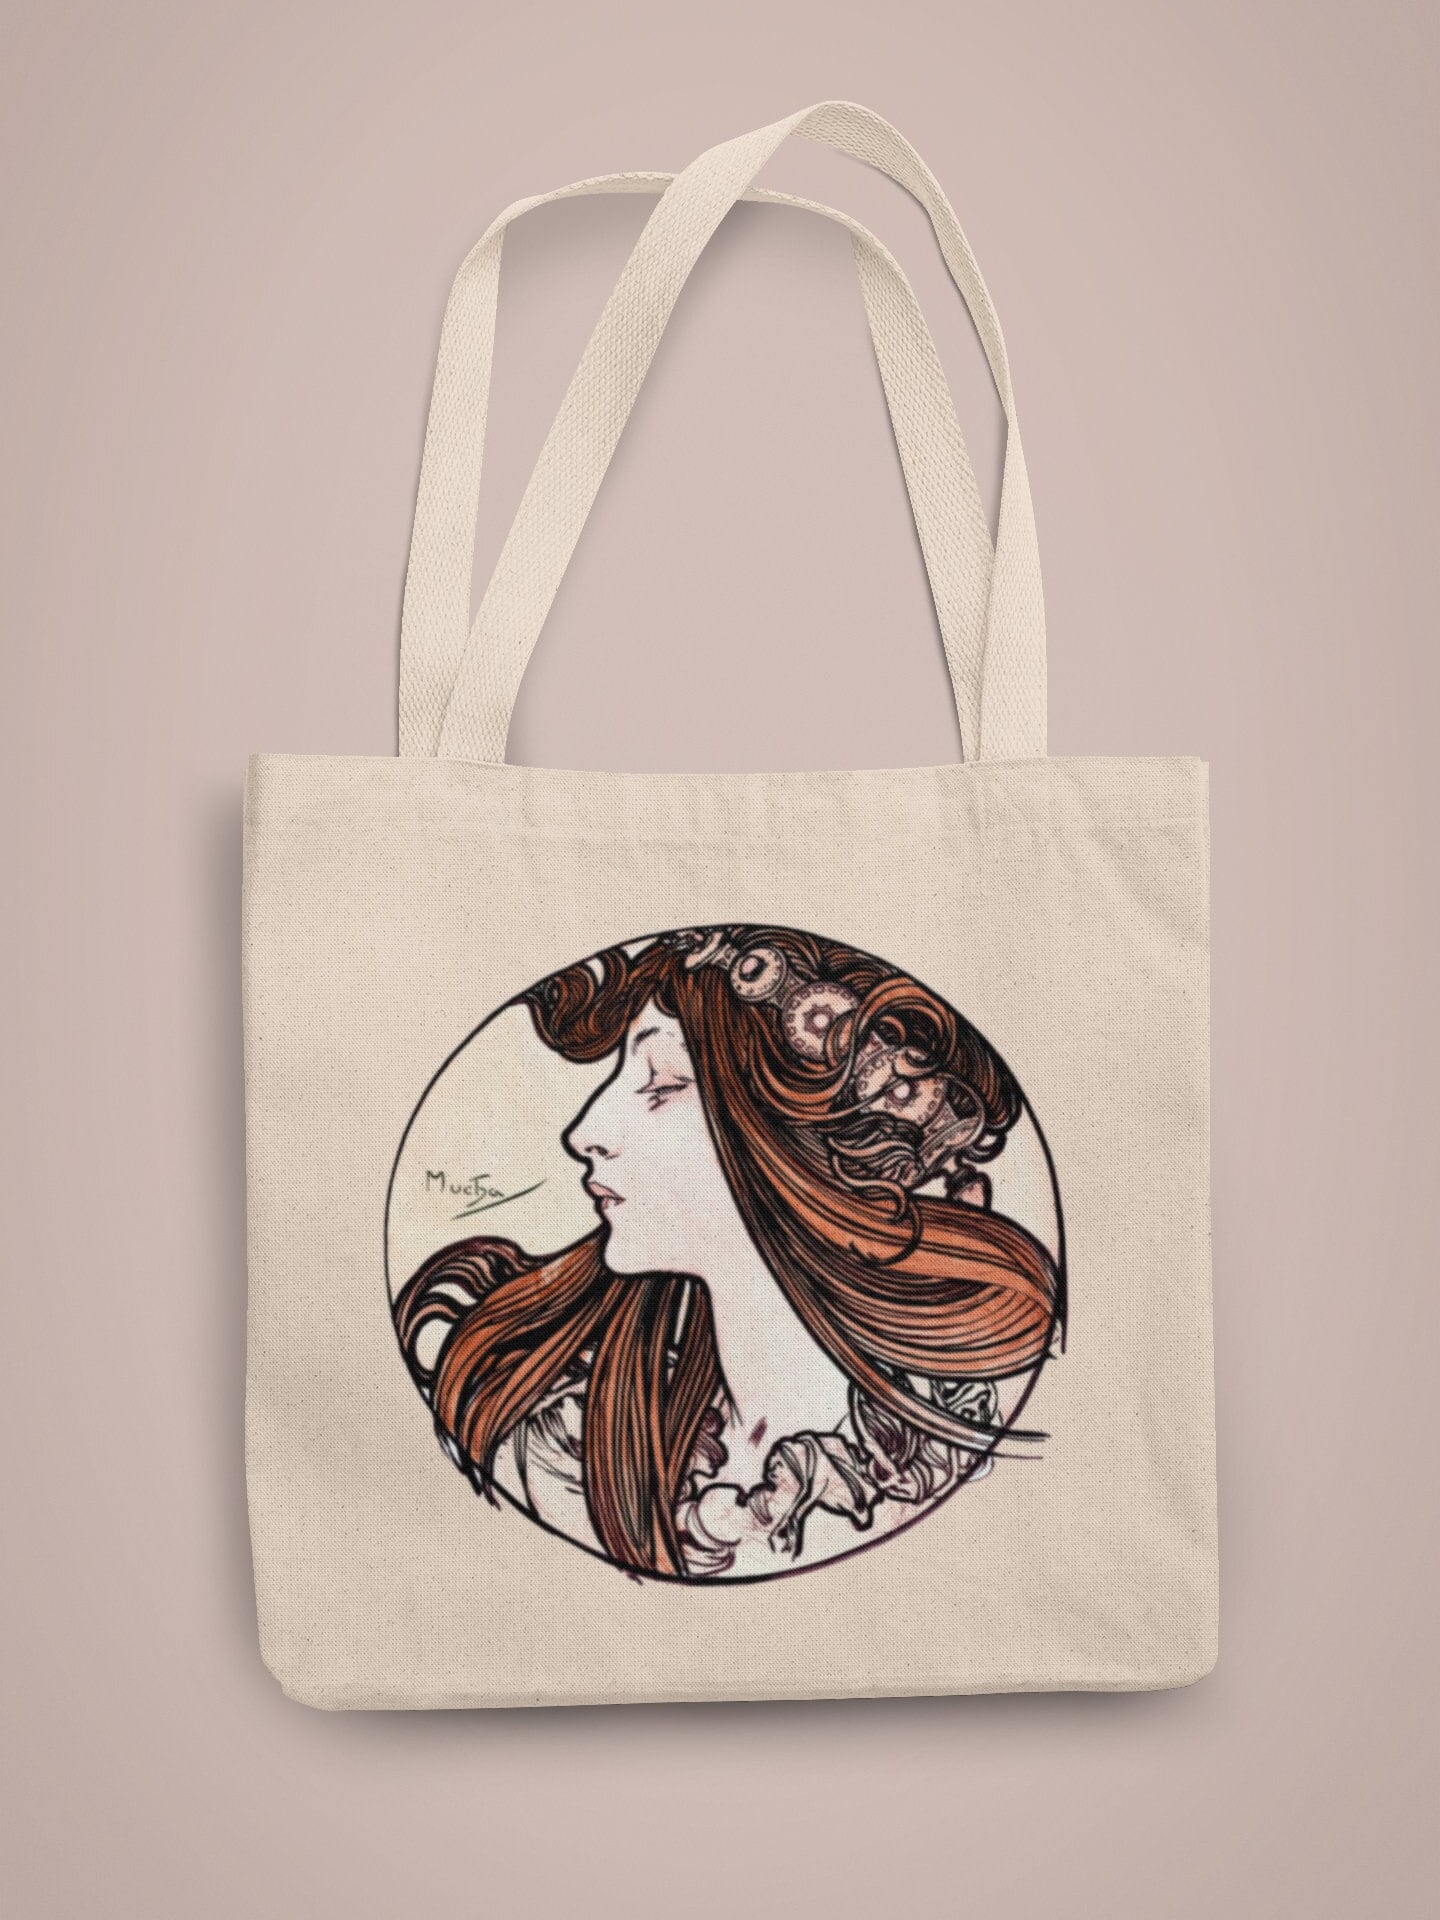 ALPHONSE MUCHA - Facade Of The Fouquet Tote Bag #2 - Pathos Studio - Tote Bags